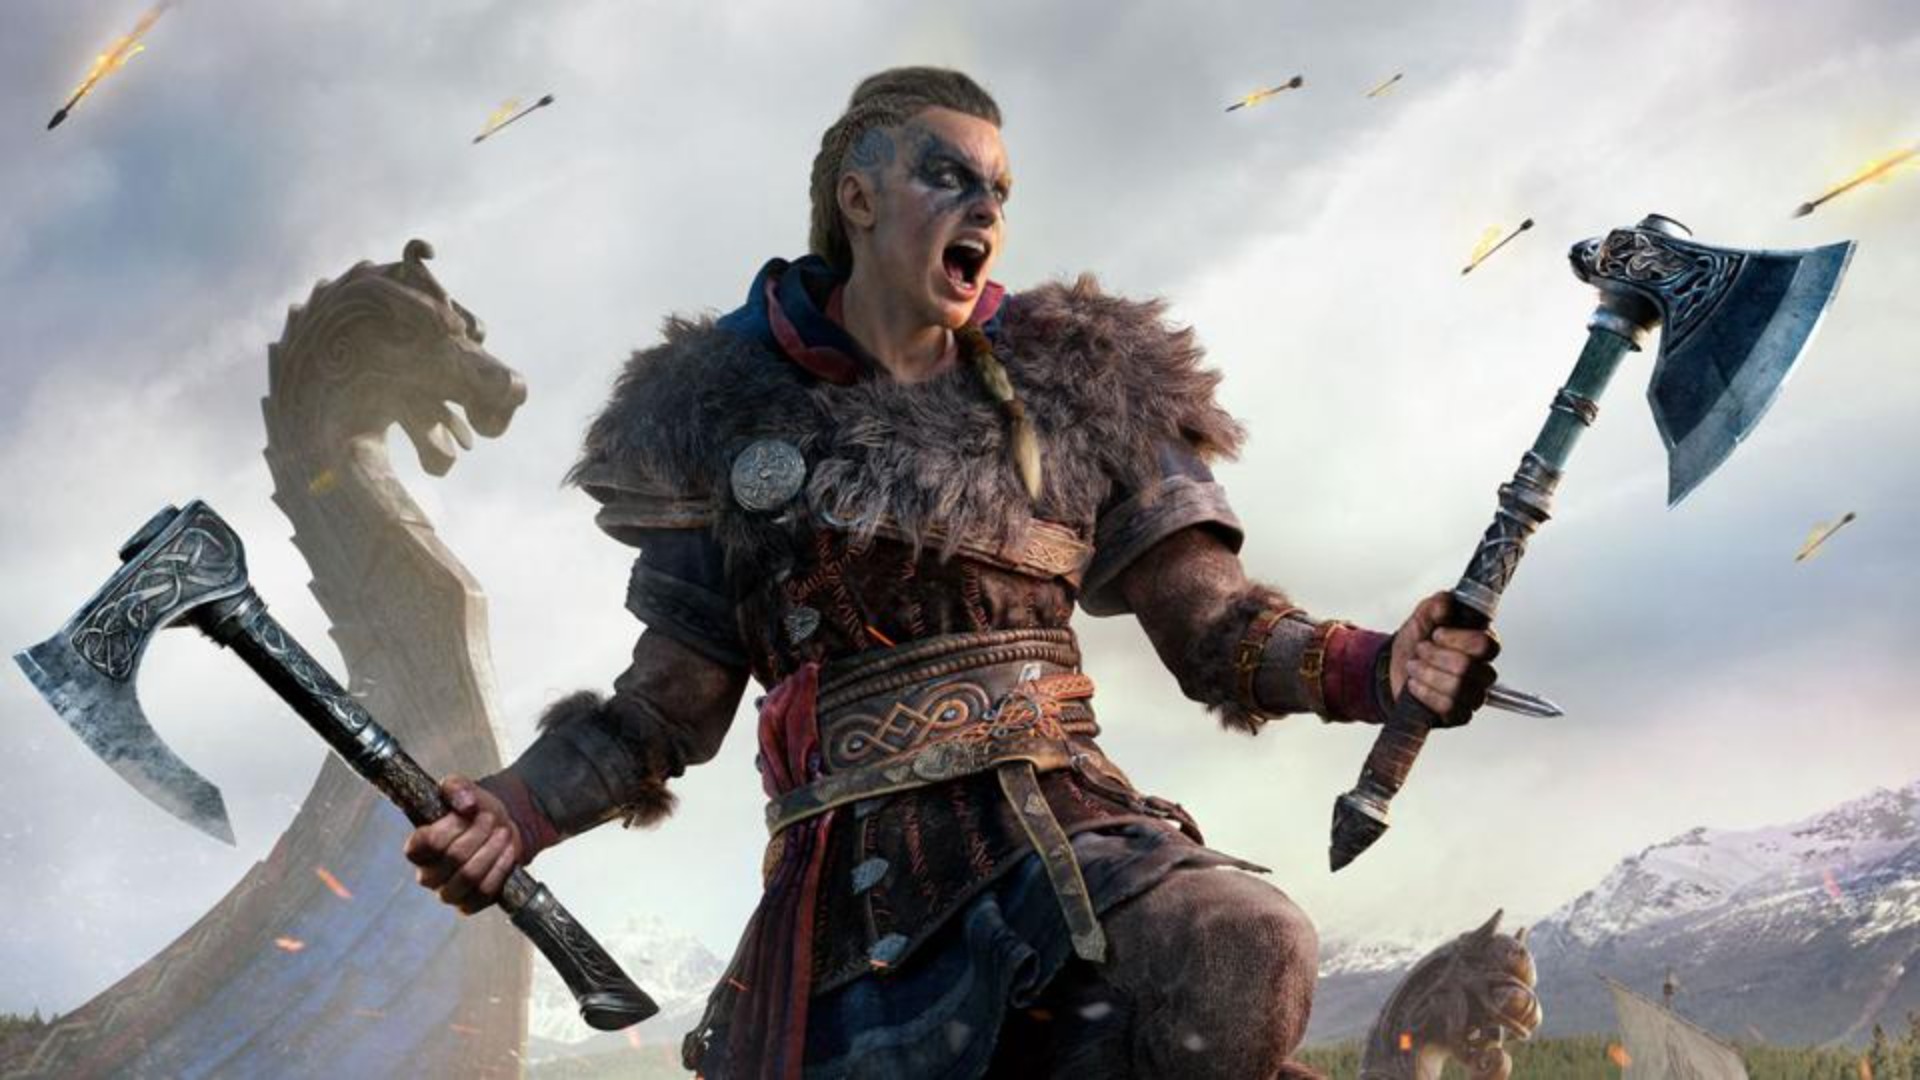 The protagonist of Assassin's Creed: Valhalla shouting in battle and wielding two axes.